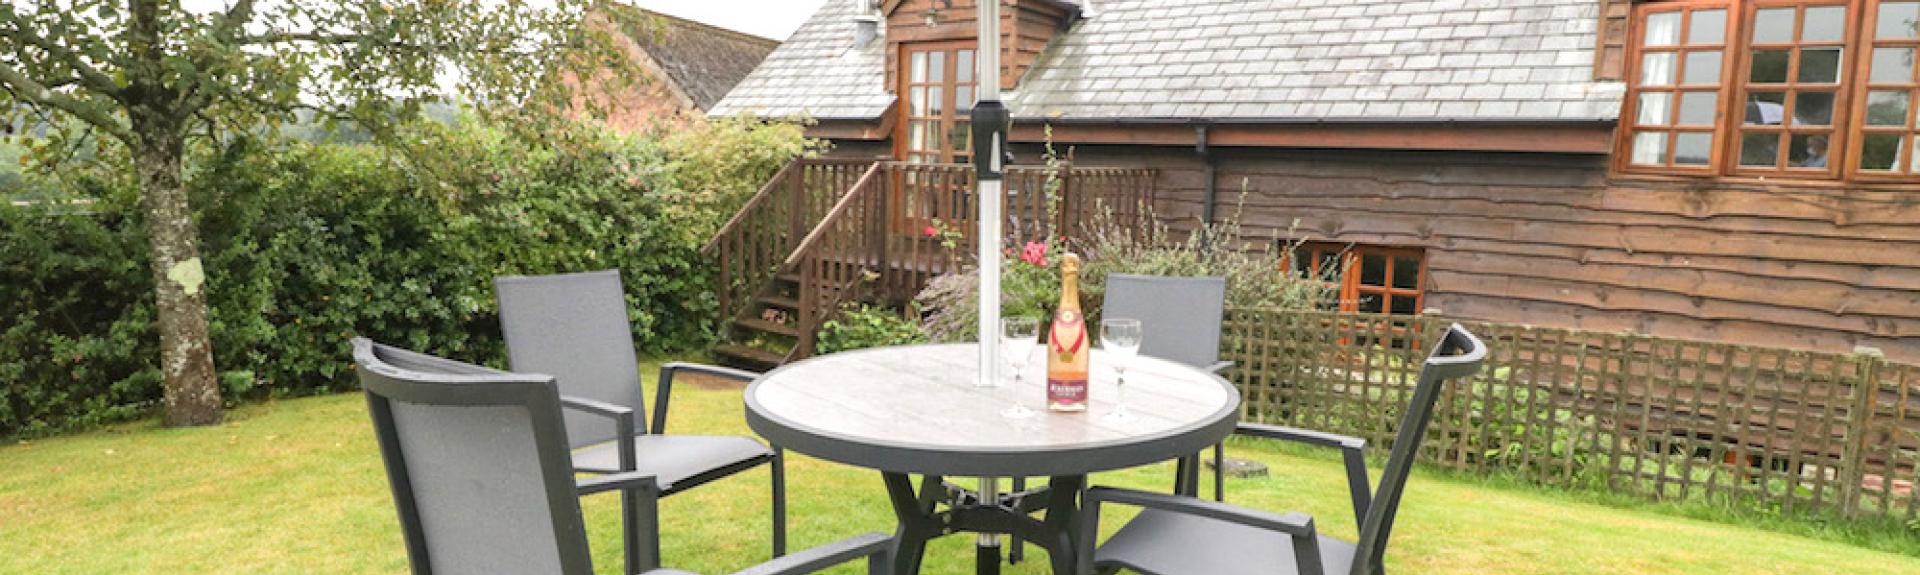 A wooden holiday cottage overlooks a large lawn with outdoor dining furniture.